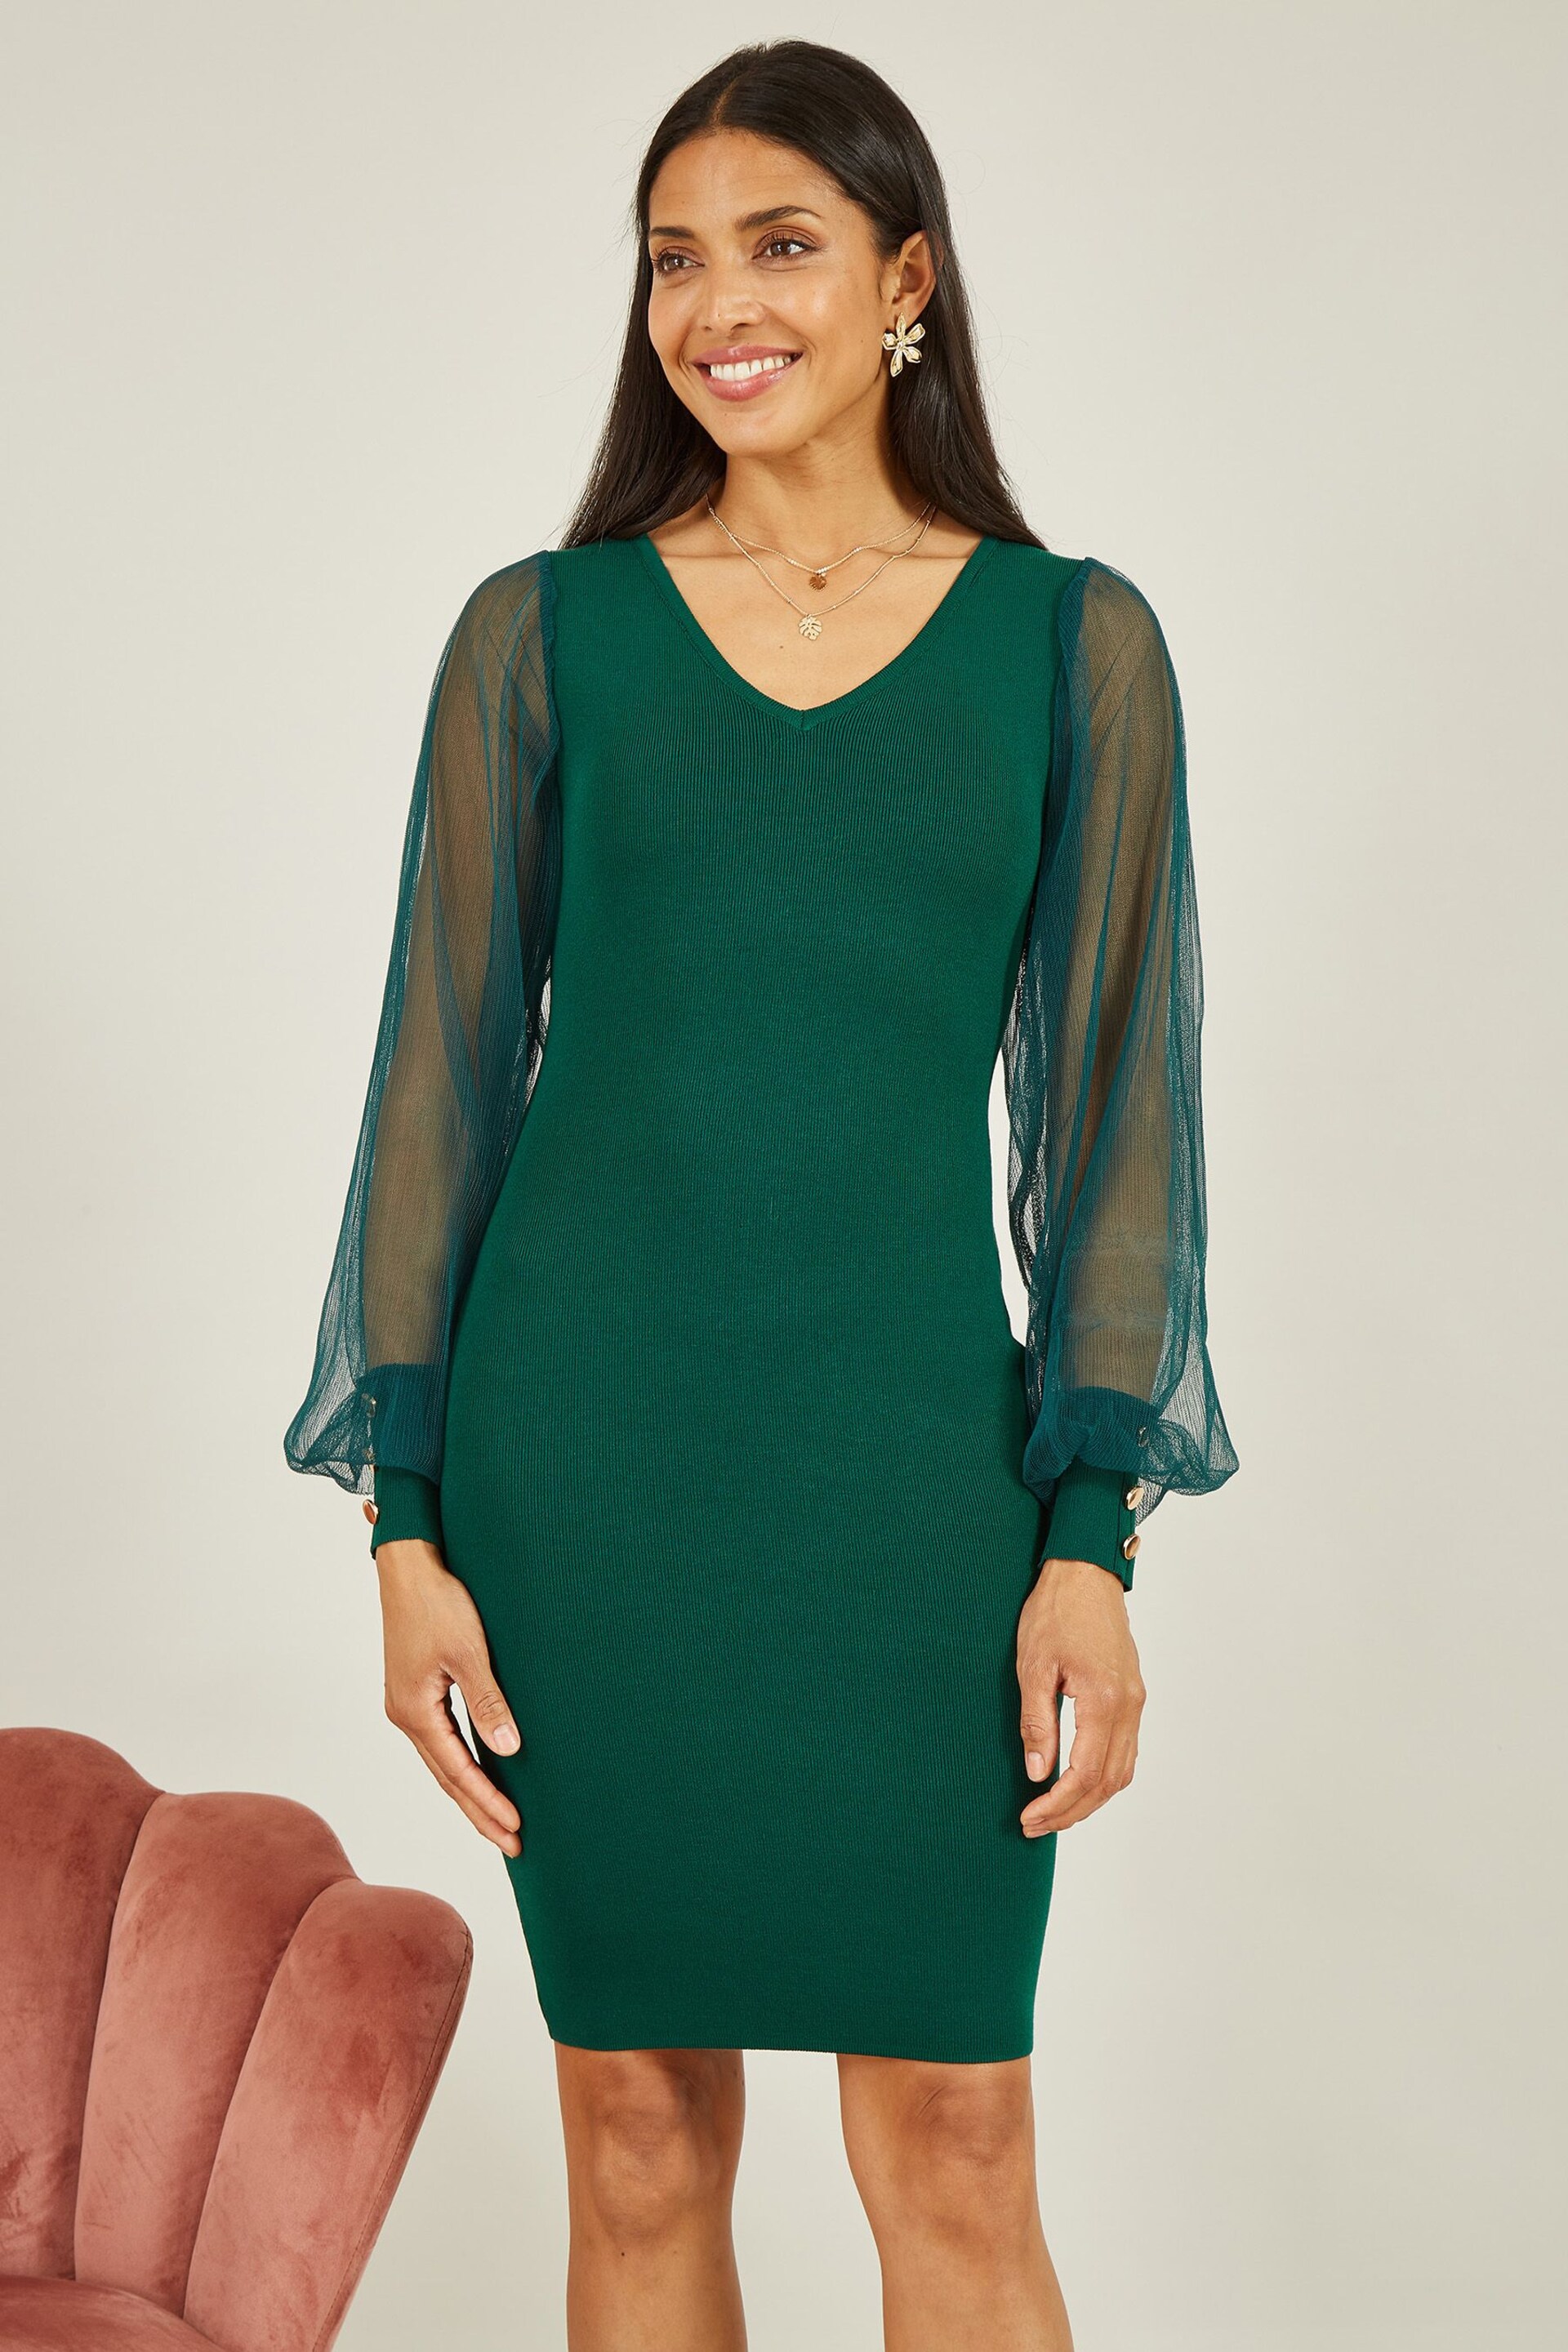 Yumi Green Knitted Body Con Dress With Chiffon Sleeve - Image 1 of 5